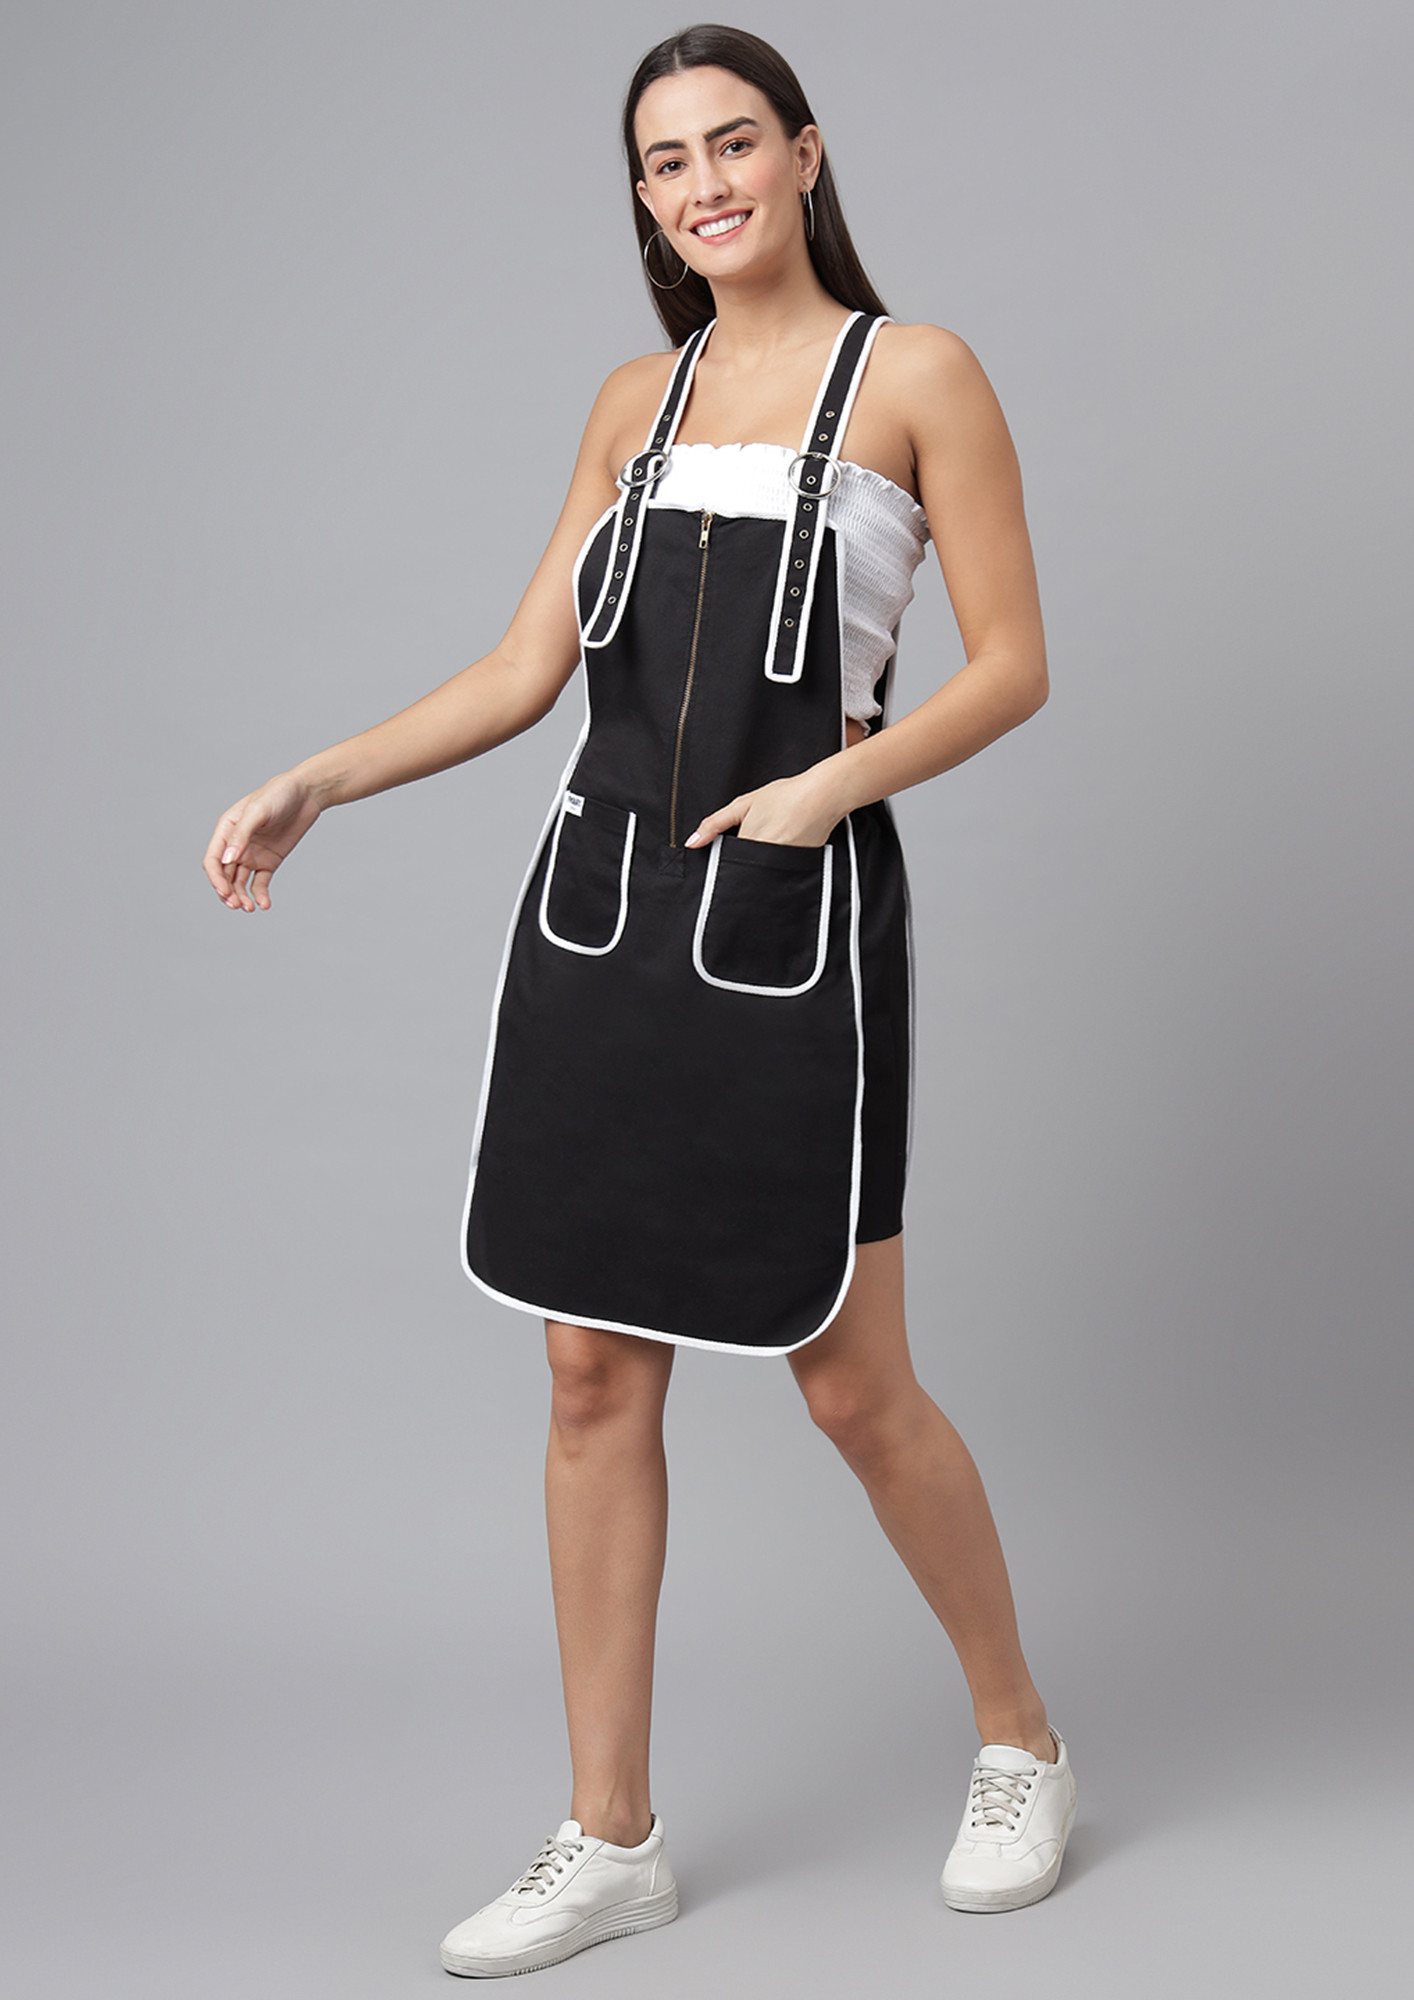 Buy FINSBURY LONDON Women's Dungaree Dress with Contrast Piping